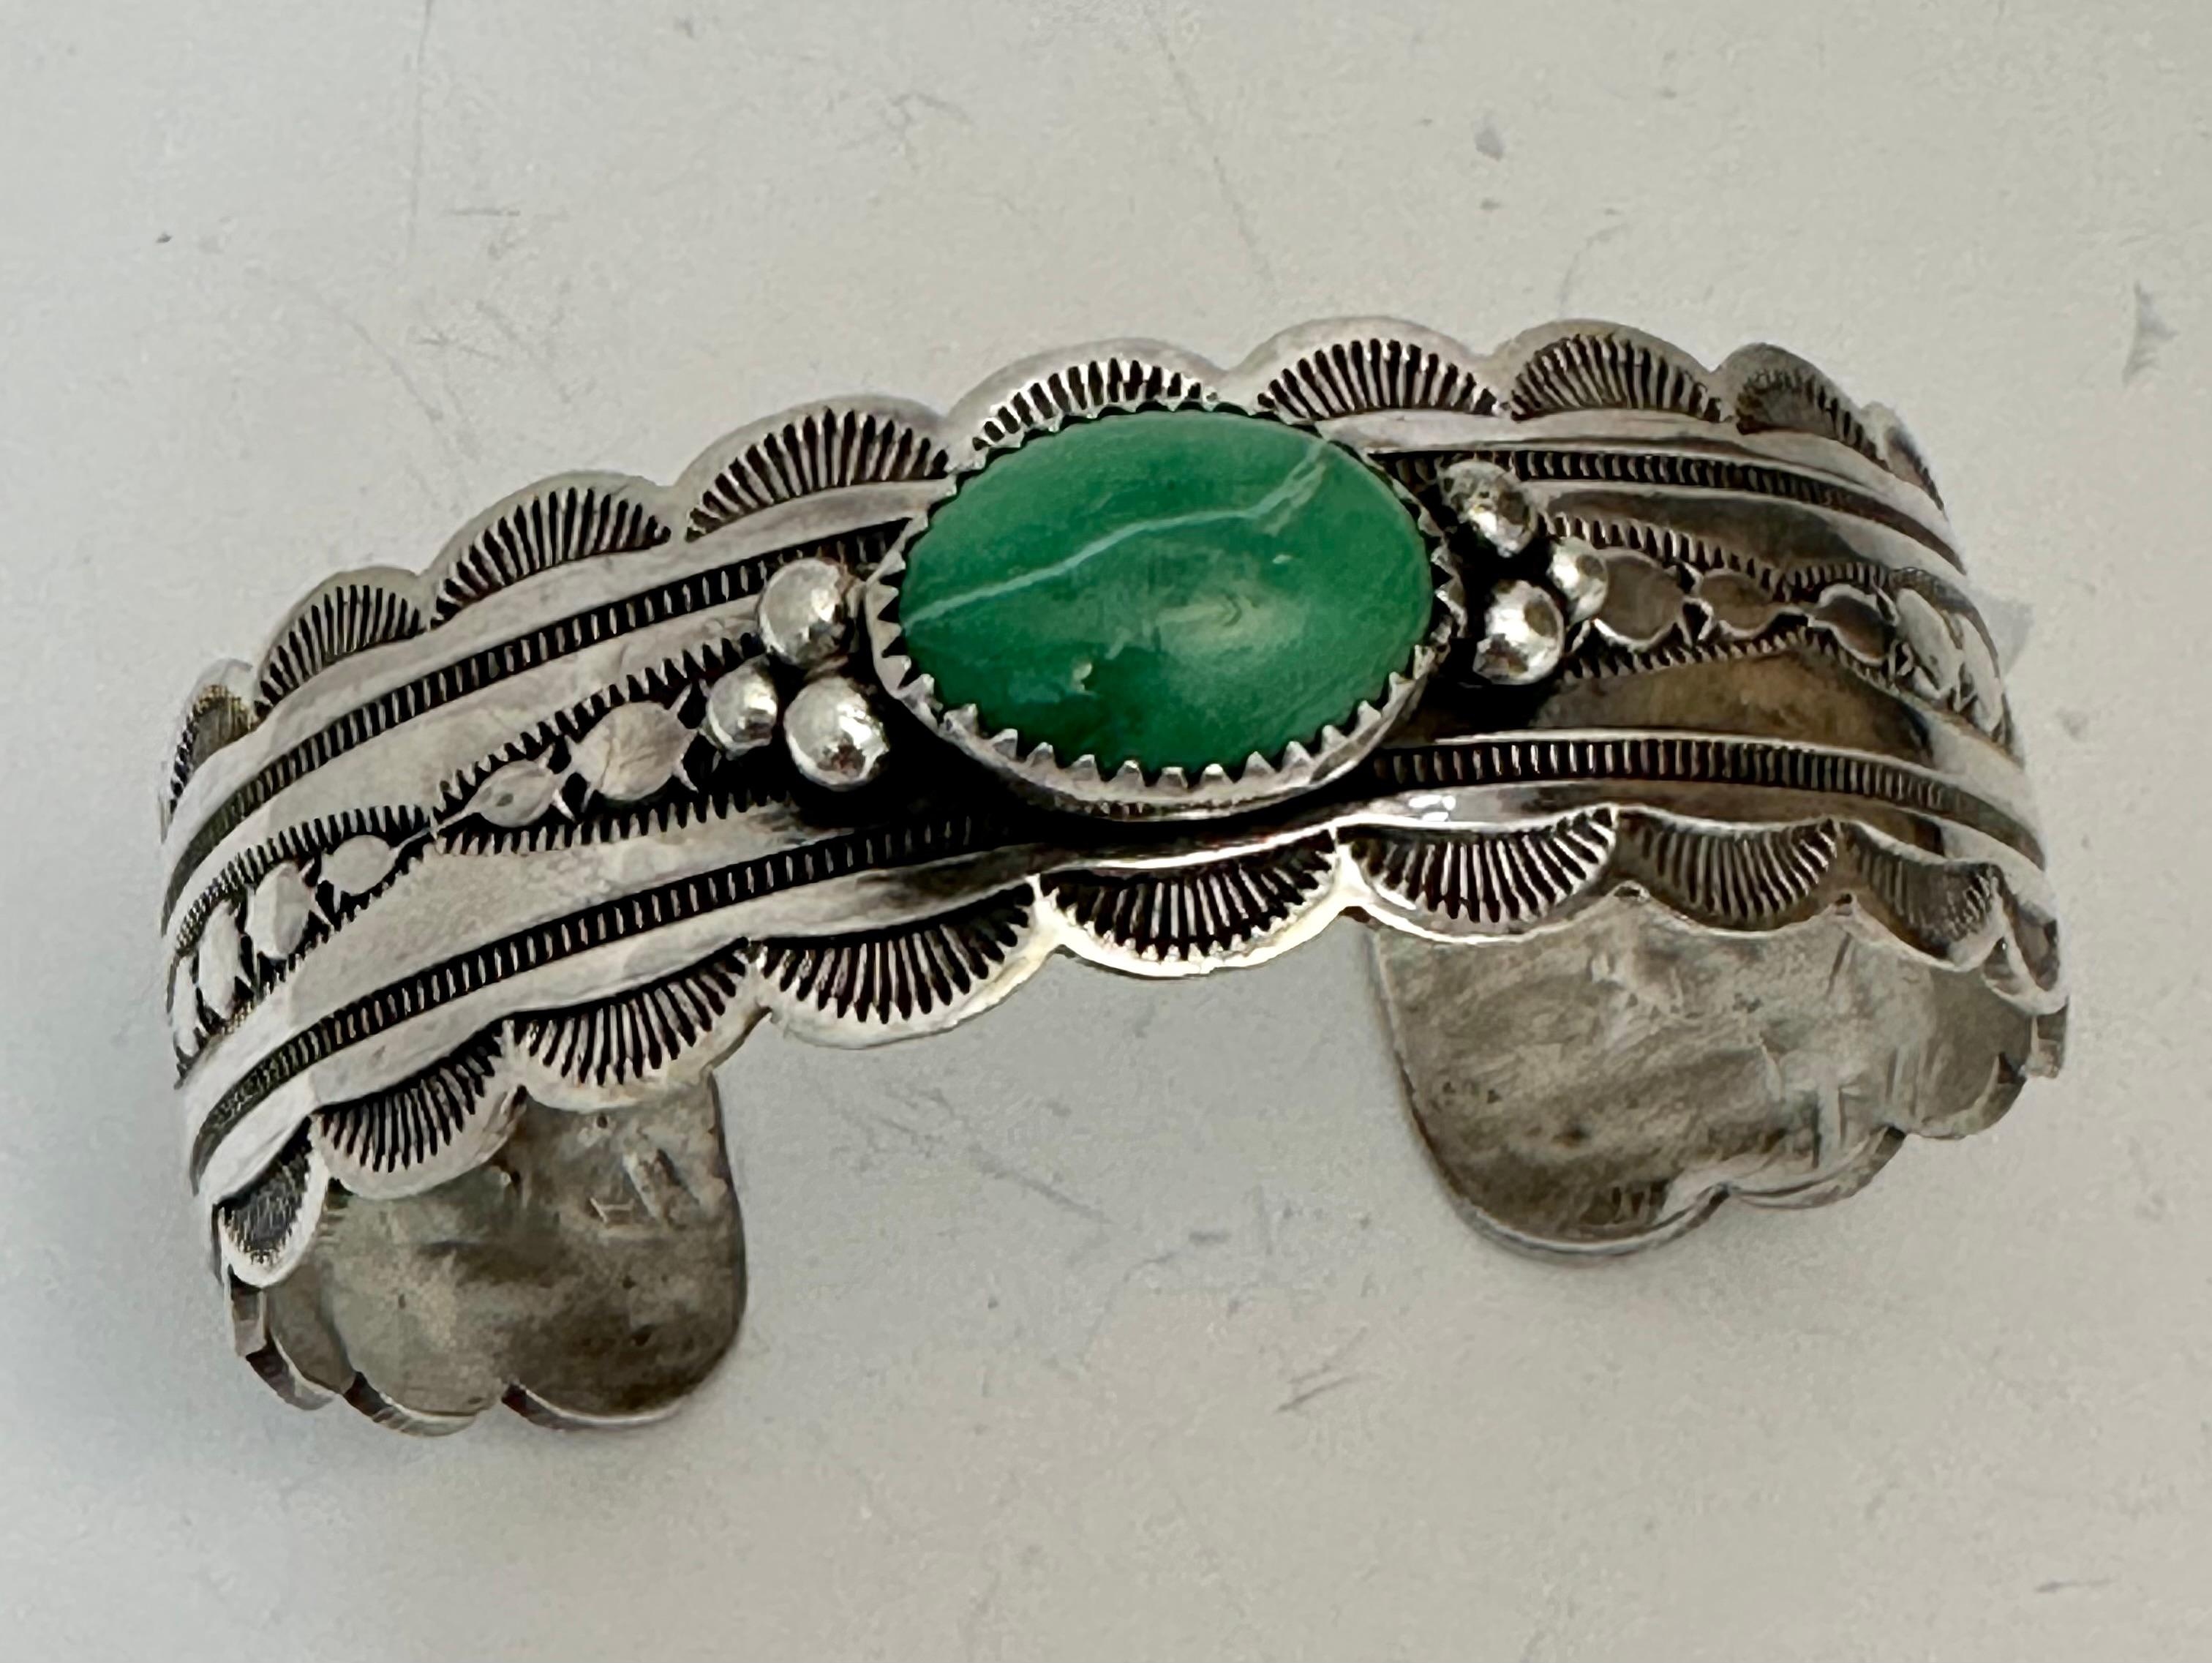 Sterling Silver .925  Cerrillos Mountain Turquoise Cuff Bracelet by Navajo Artist T.T.
Measures approximately: 
20mm wide
2 1/2